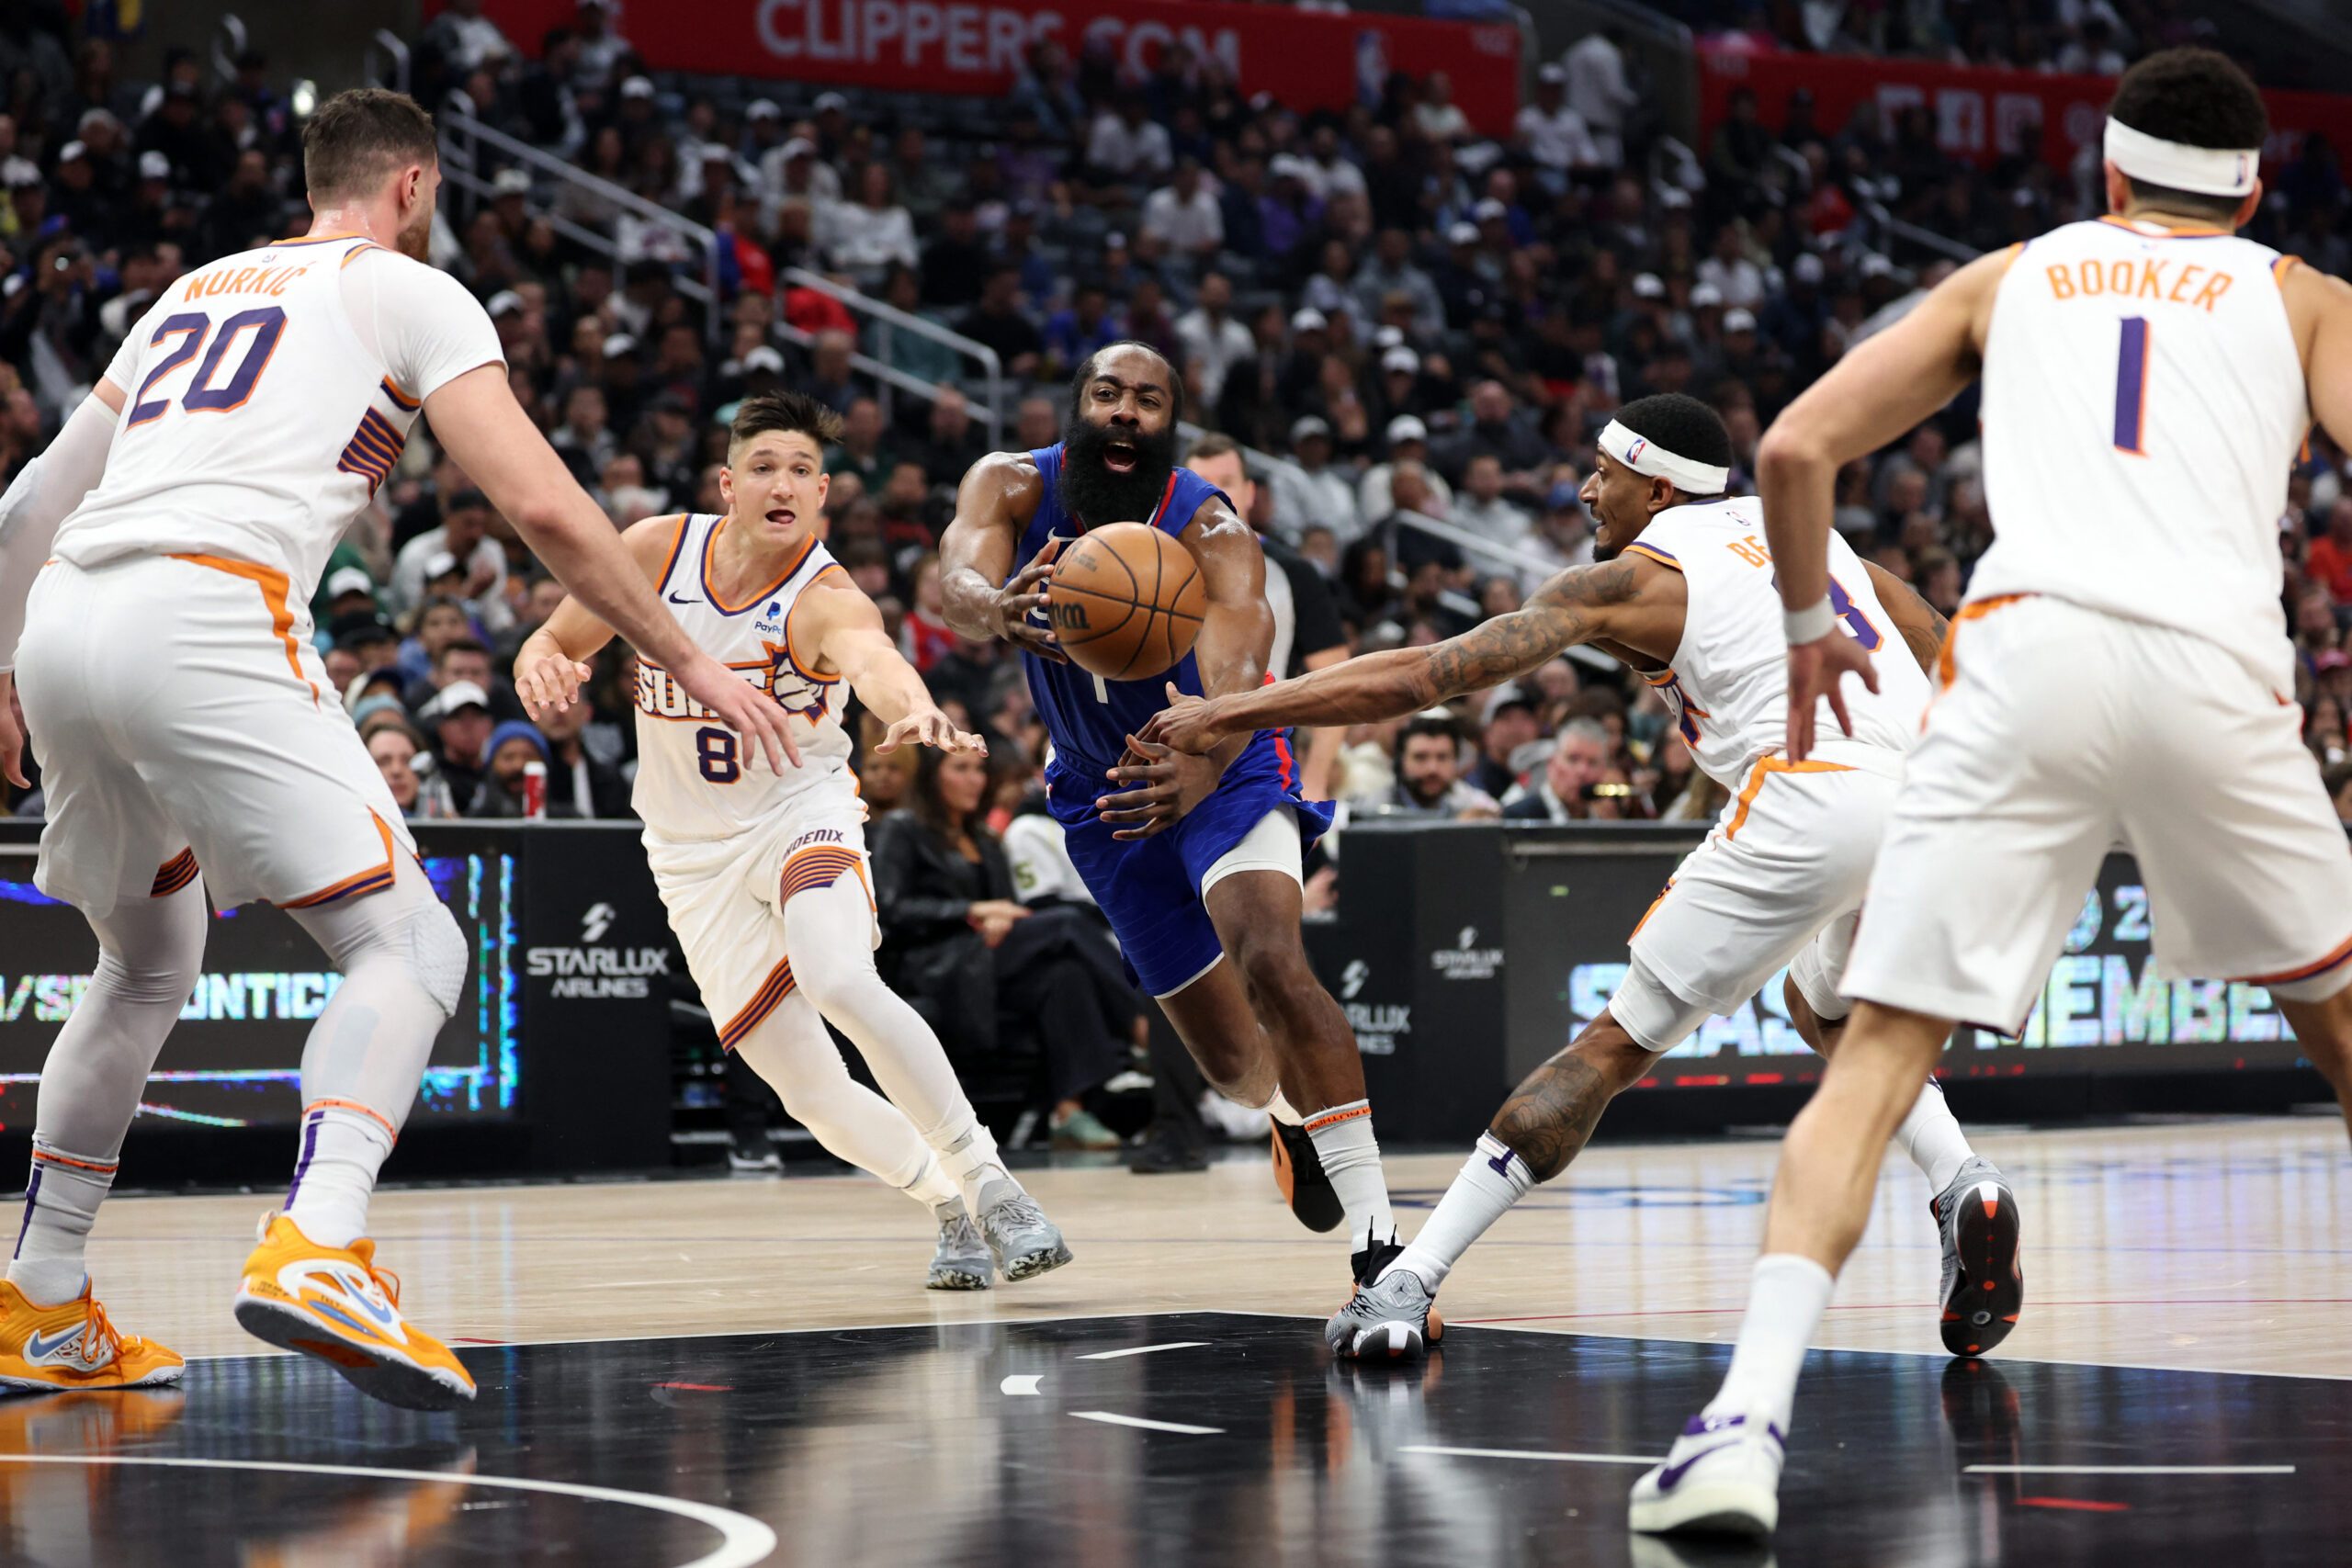 Clippers pull away late to blow out Suns